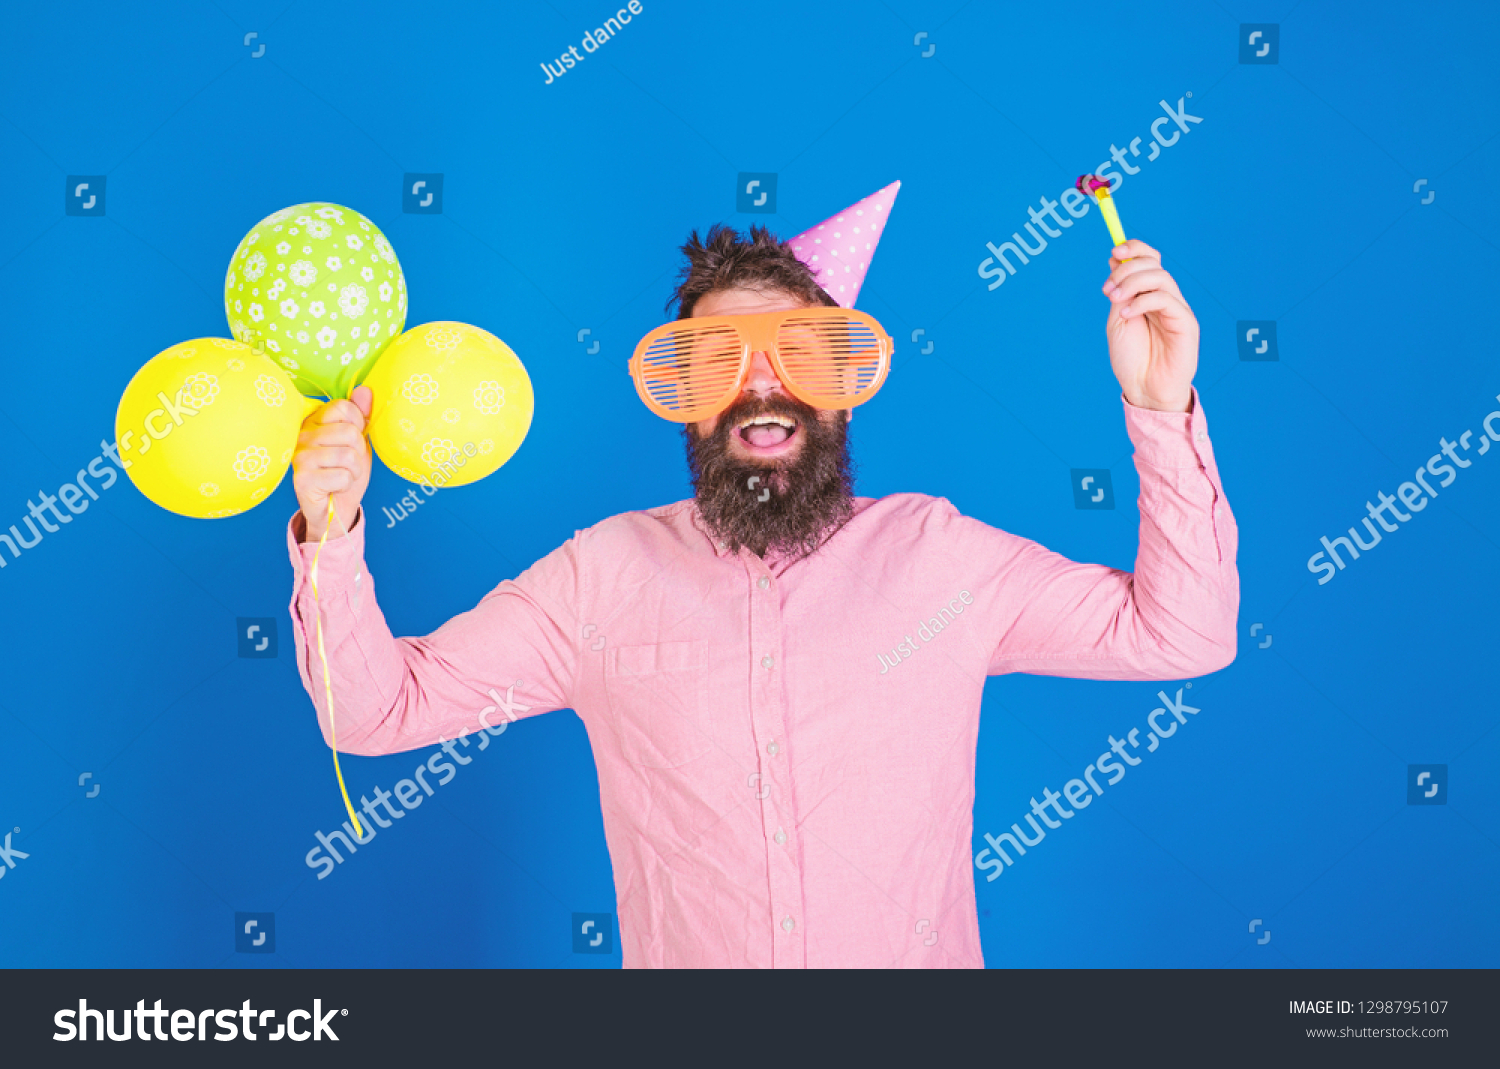 Hipster in giant sunglasses celebrating birthday. Man with beard and mustache on happy face holds party horn, blue background. Celebration concept. Guy in party hat with air balloons celebrates. #1298795107